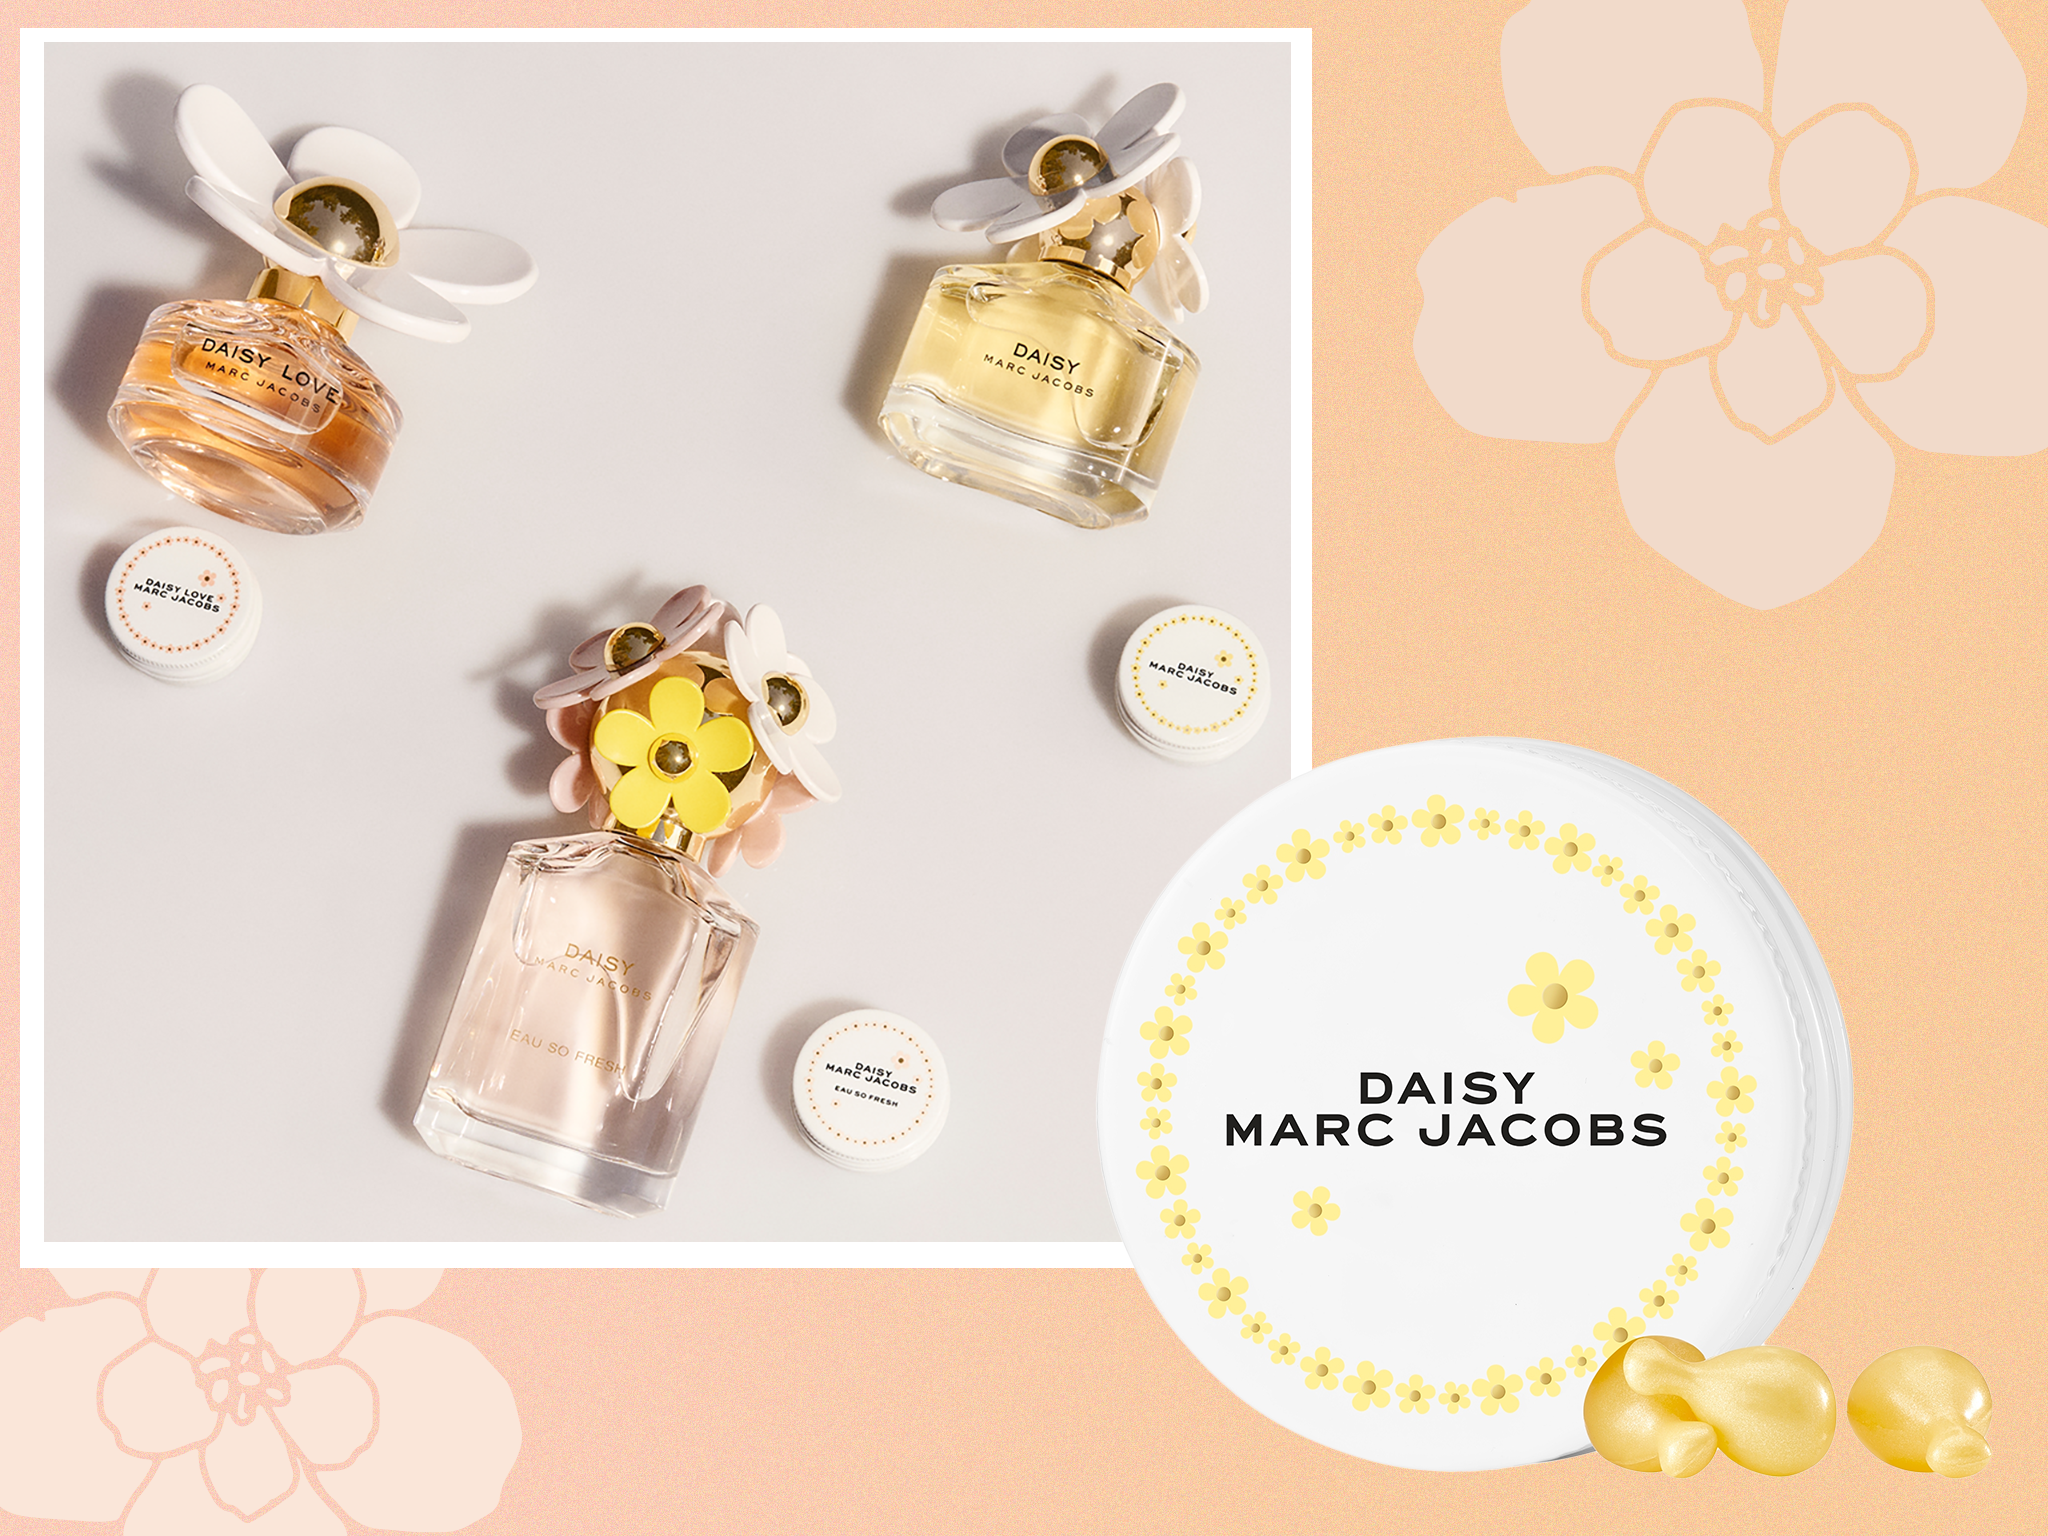 Daisy Rose - The perfect holidays gift combination: The